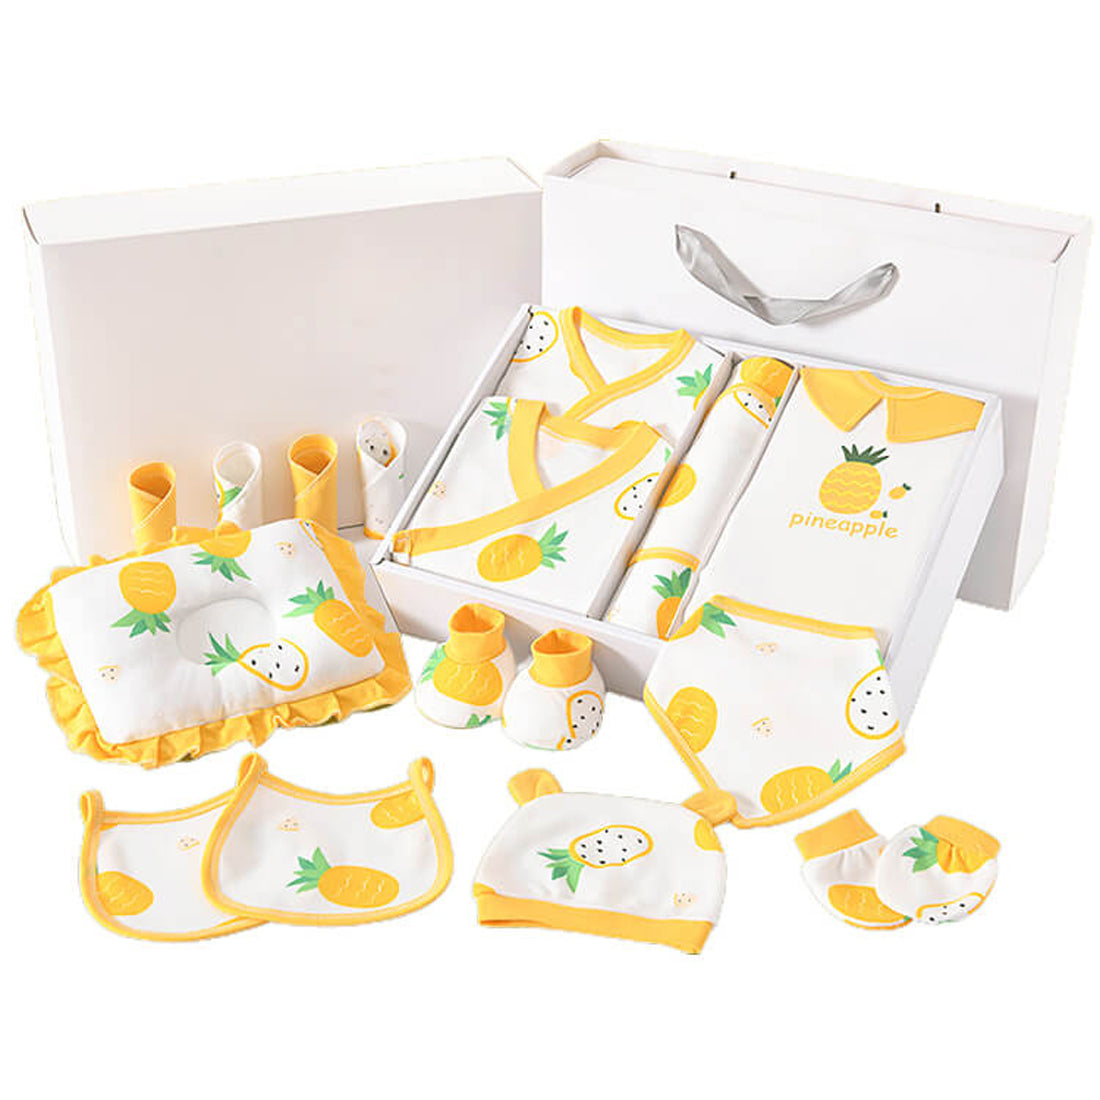 Little Surprise Box - 25 pcs Newly Born Baby Girl/Boy Gift Hamper All Over Pineapple Yellow